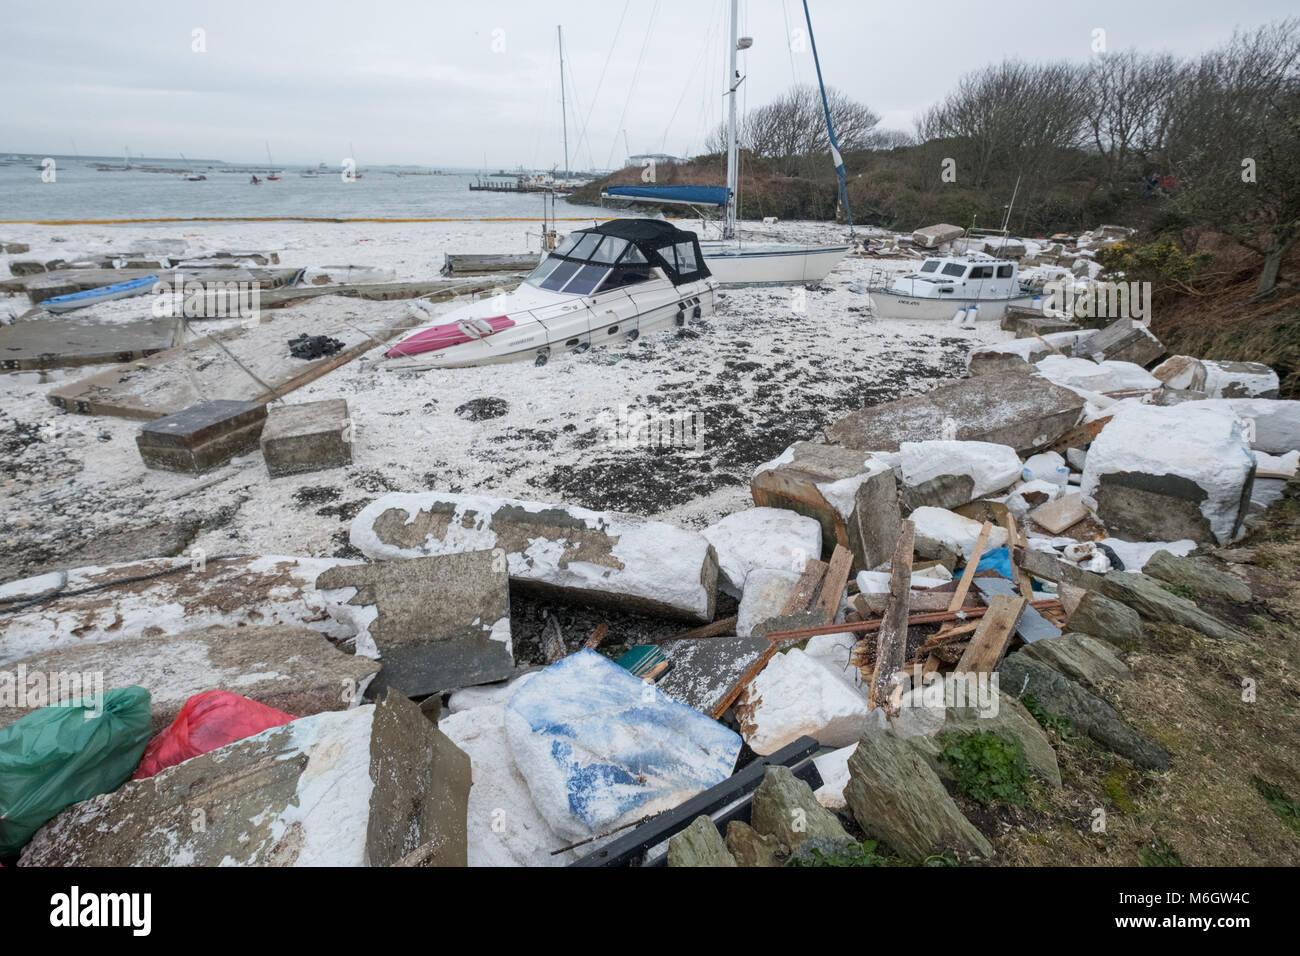 Up to 80 boats that where anchored at Holyhead marina in Anglesey, north Wales have been damaged by gale force winds on March 4, 2018 from the remnants of Storm Emma with some winds reaching 80mph. The coastguard are advising the public to avoid the area whilst they deal with the clean up operation. © Christopher Middleton/Alamy Live News Credit: Christopher Middleton/Alamy Live News Stock Photo